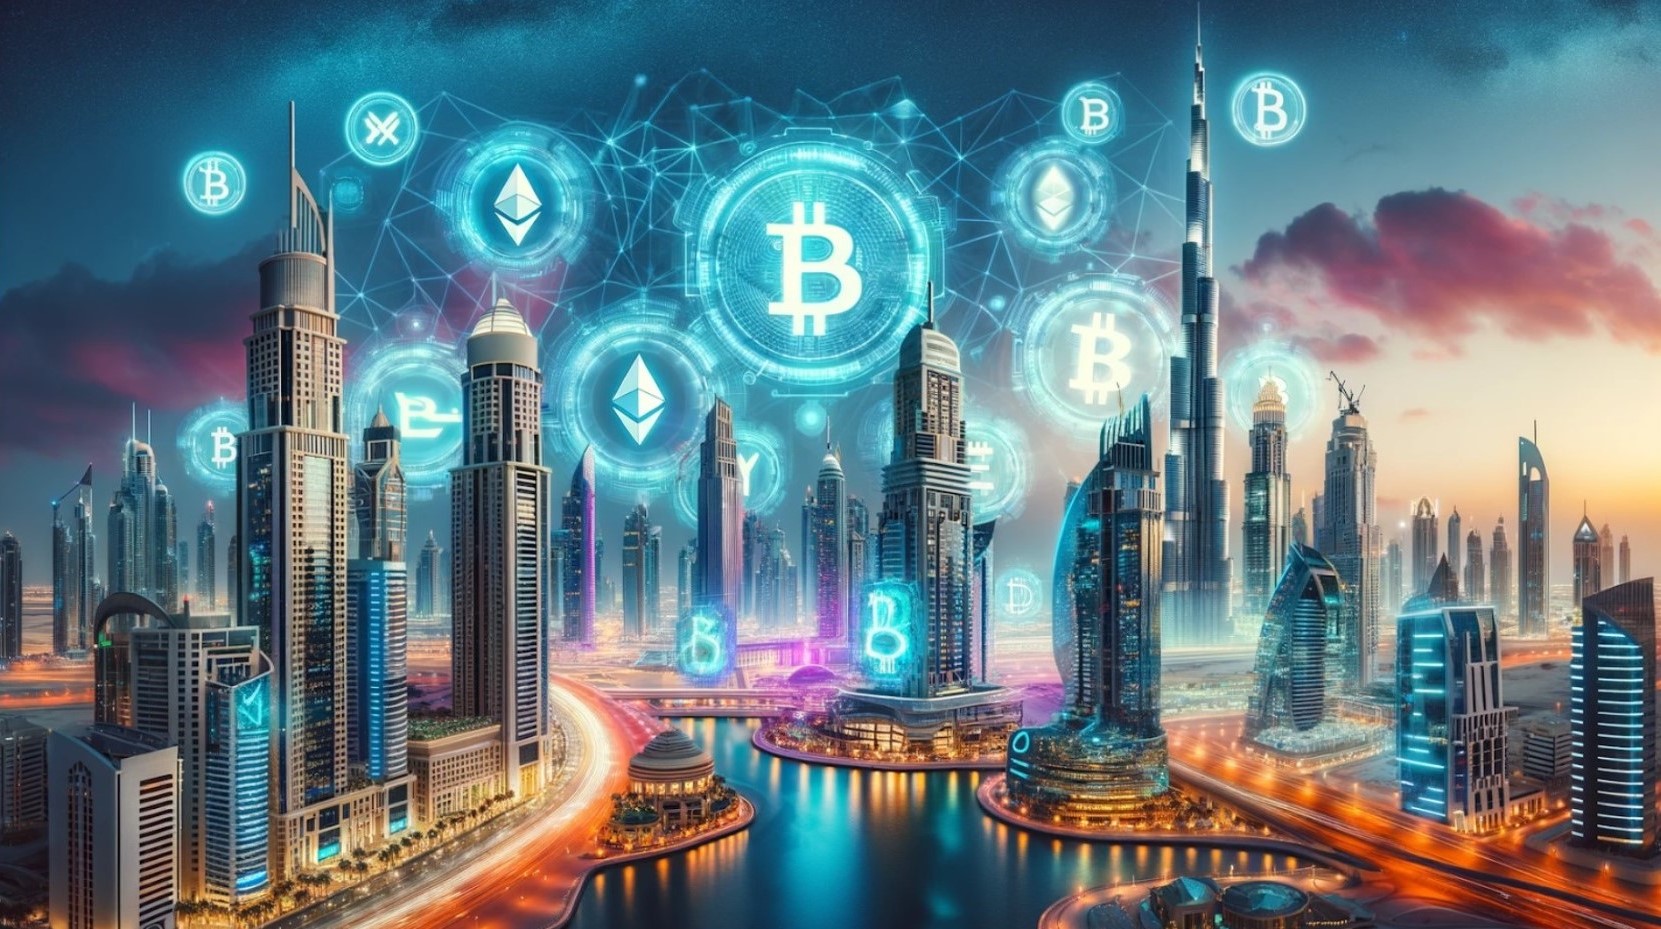 #CryptoExplained: The UAE’s Technological Renaissance Could Be Powered ...